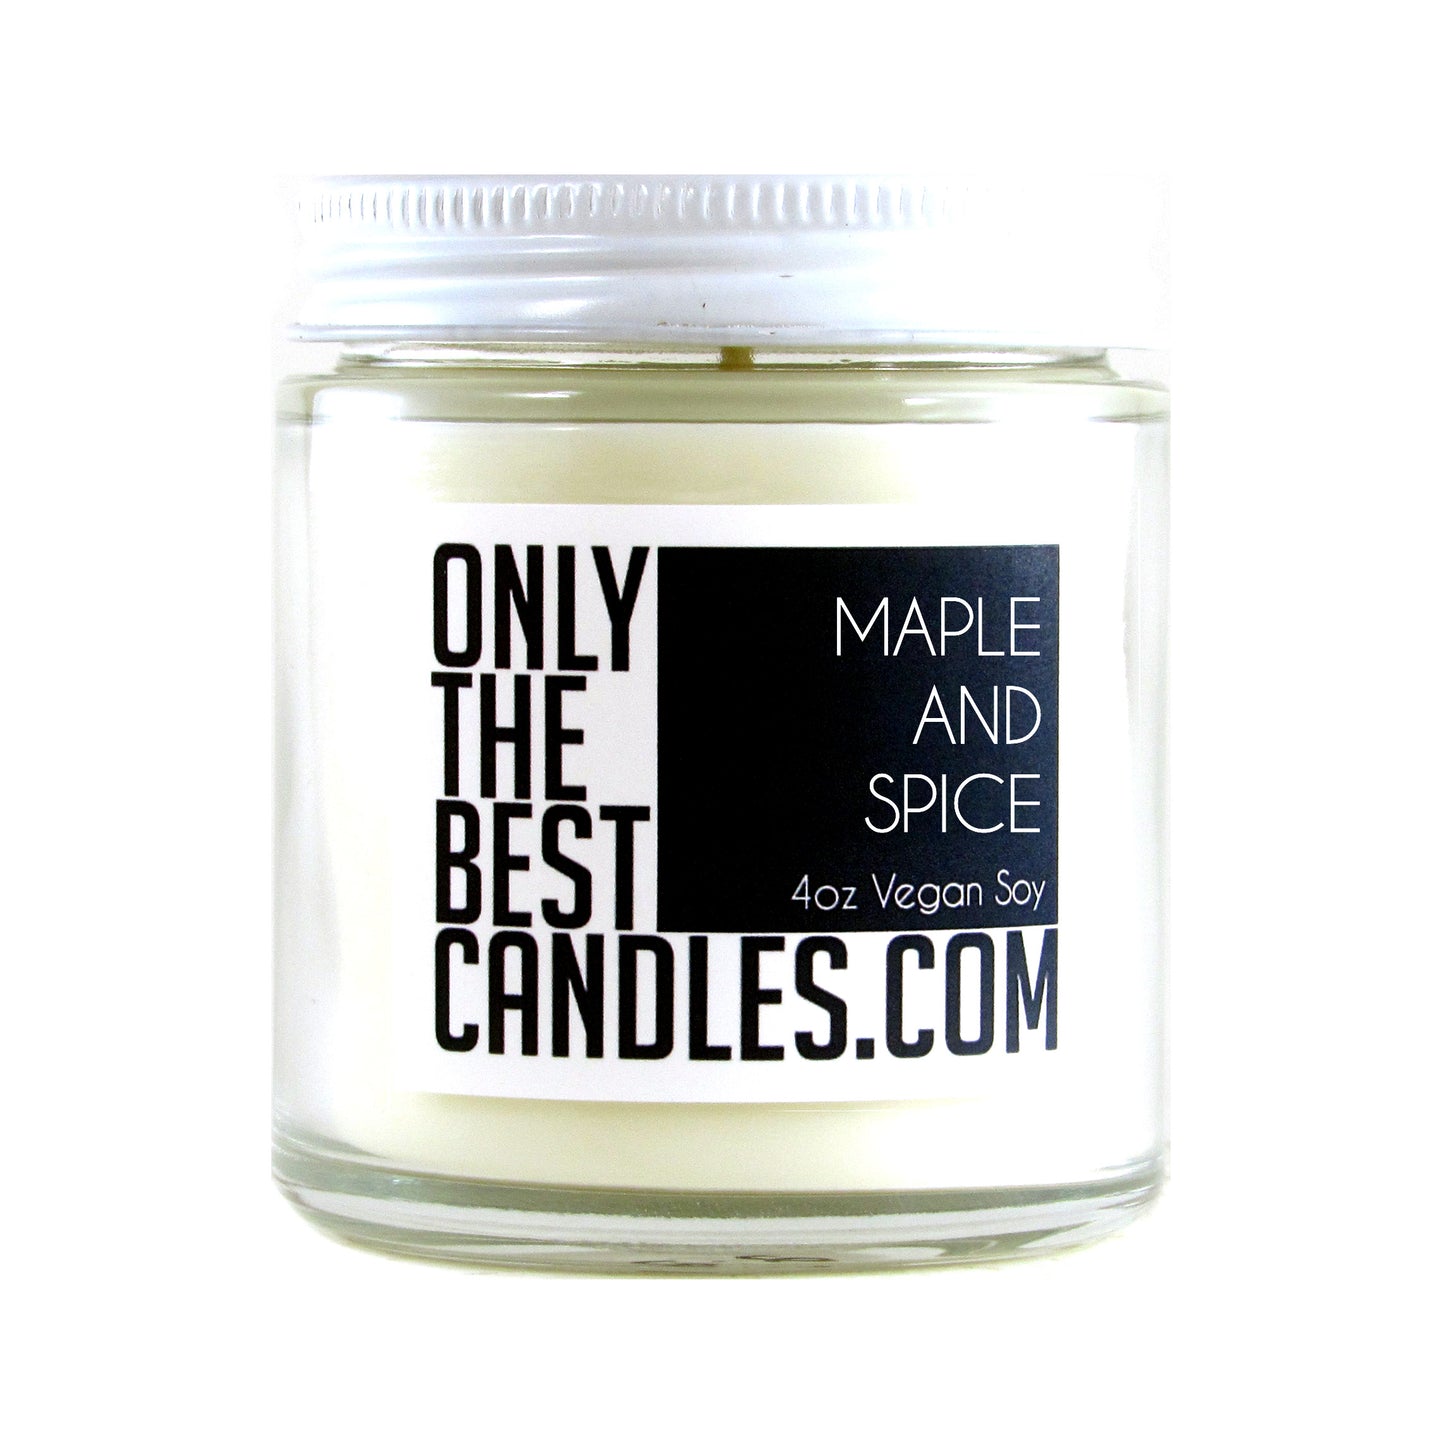 Maple and Spice 4oz Candle